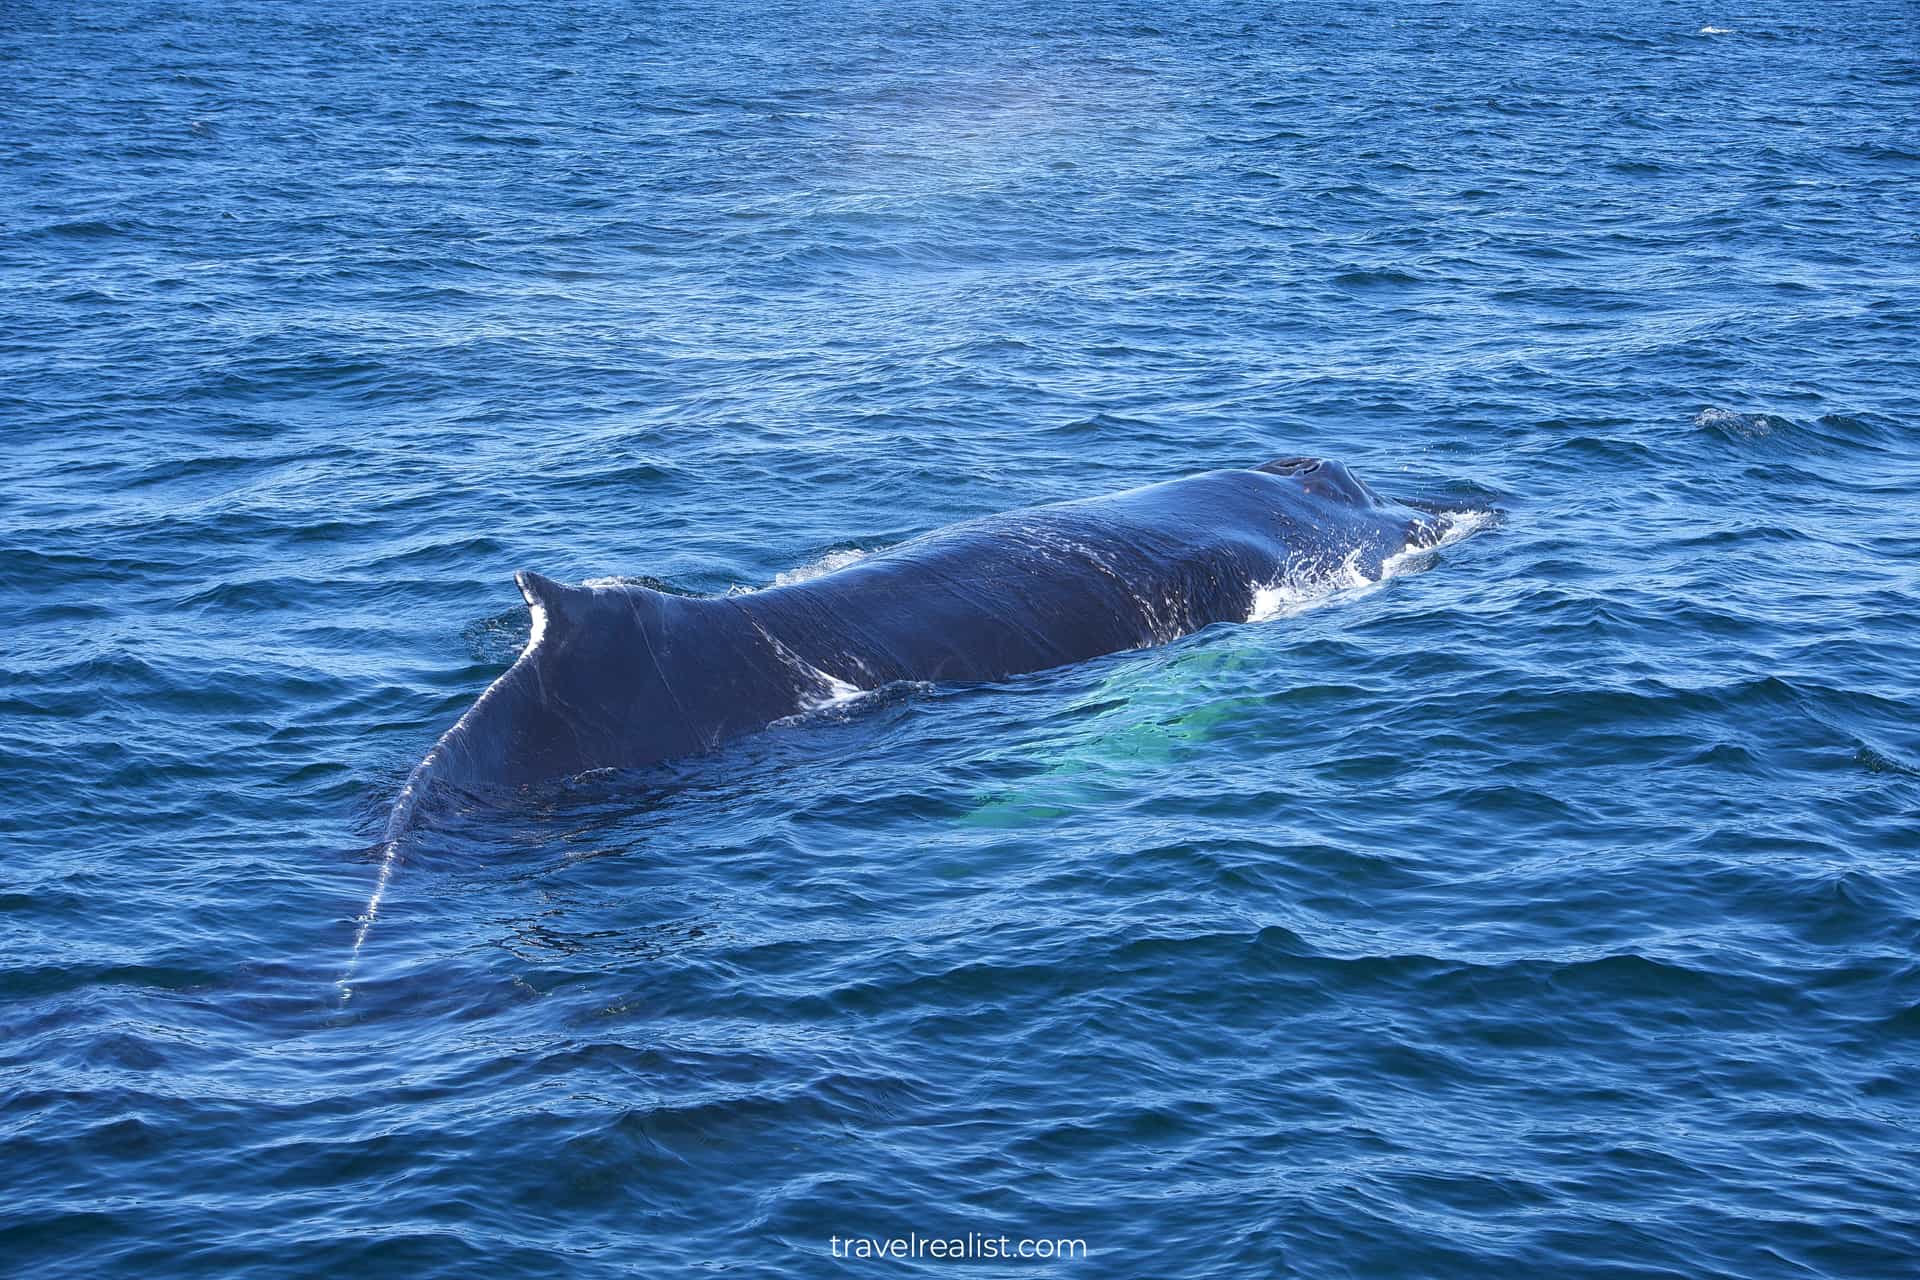 Humpback whale on Boston Whale Watching trip in Massachusetts, US